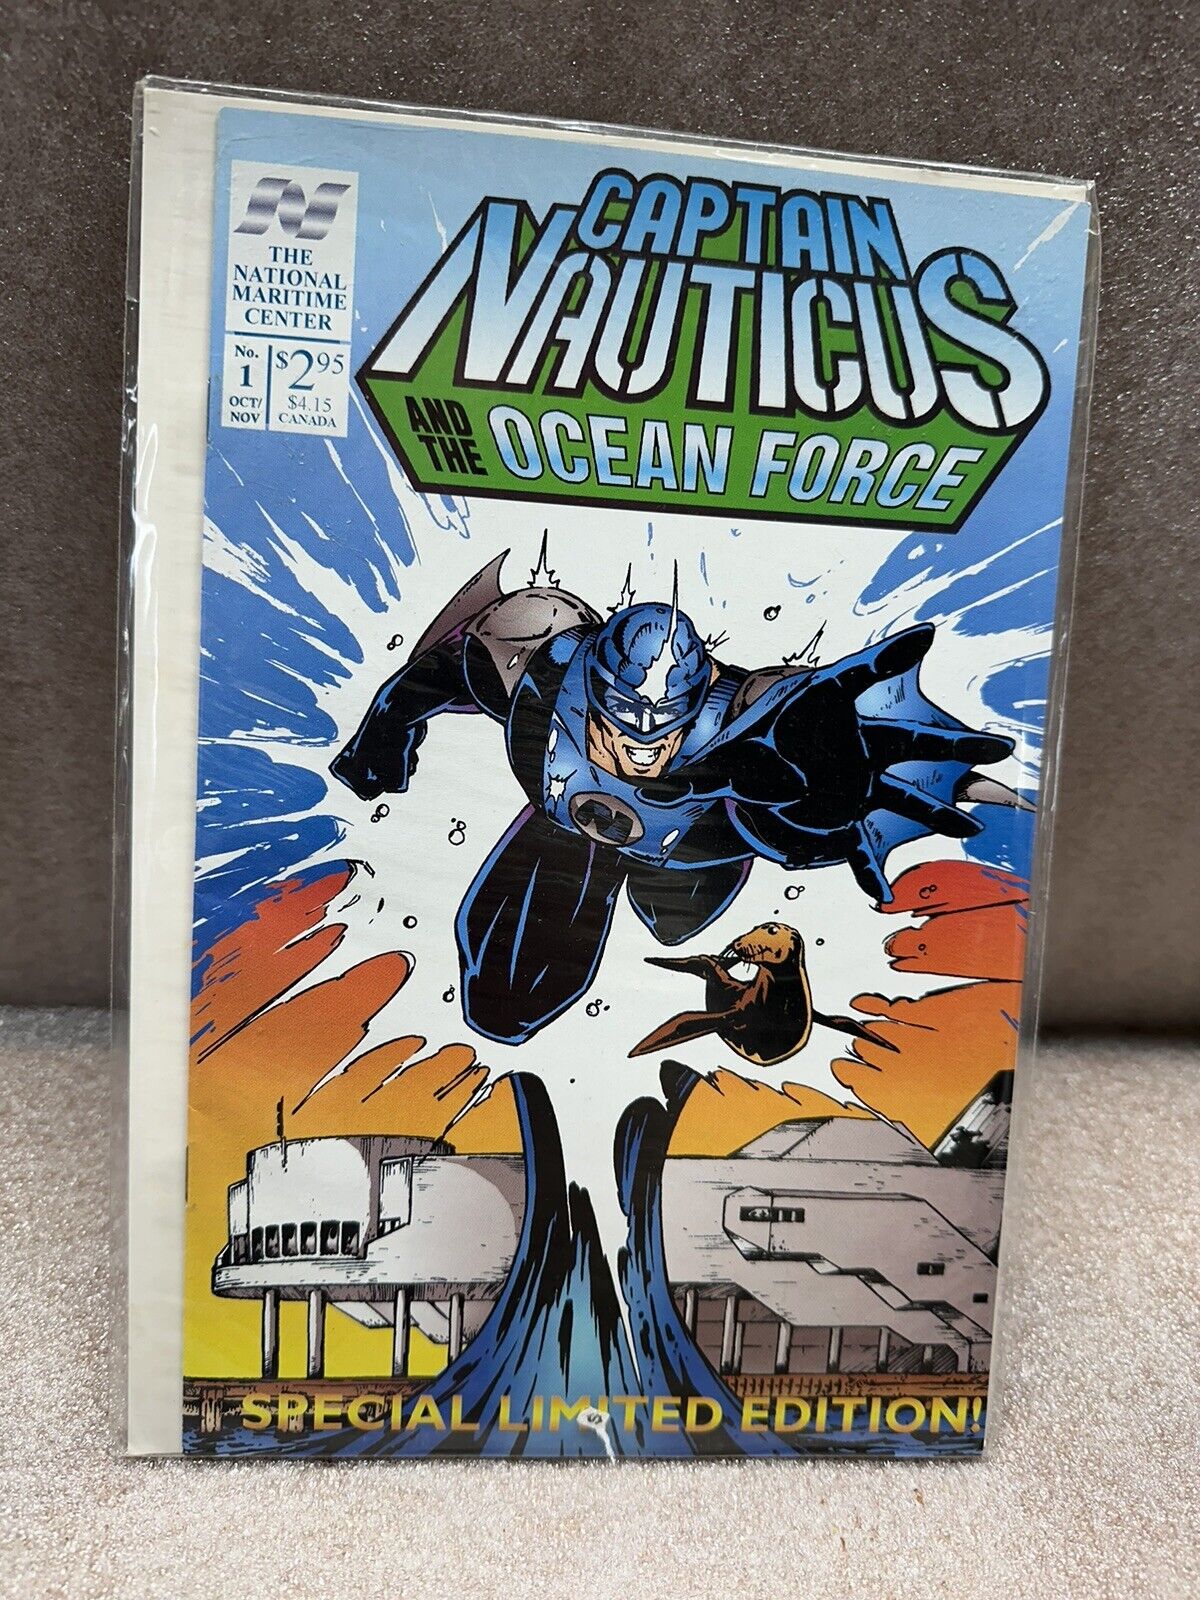 Captain Nauticus and the Ocean Force #1 Newsstand Entity Comics